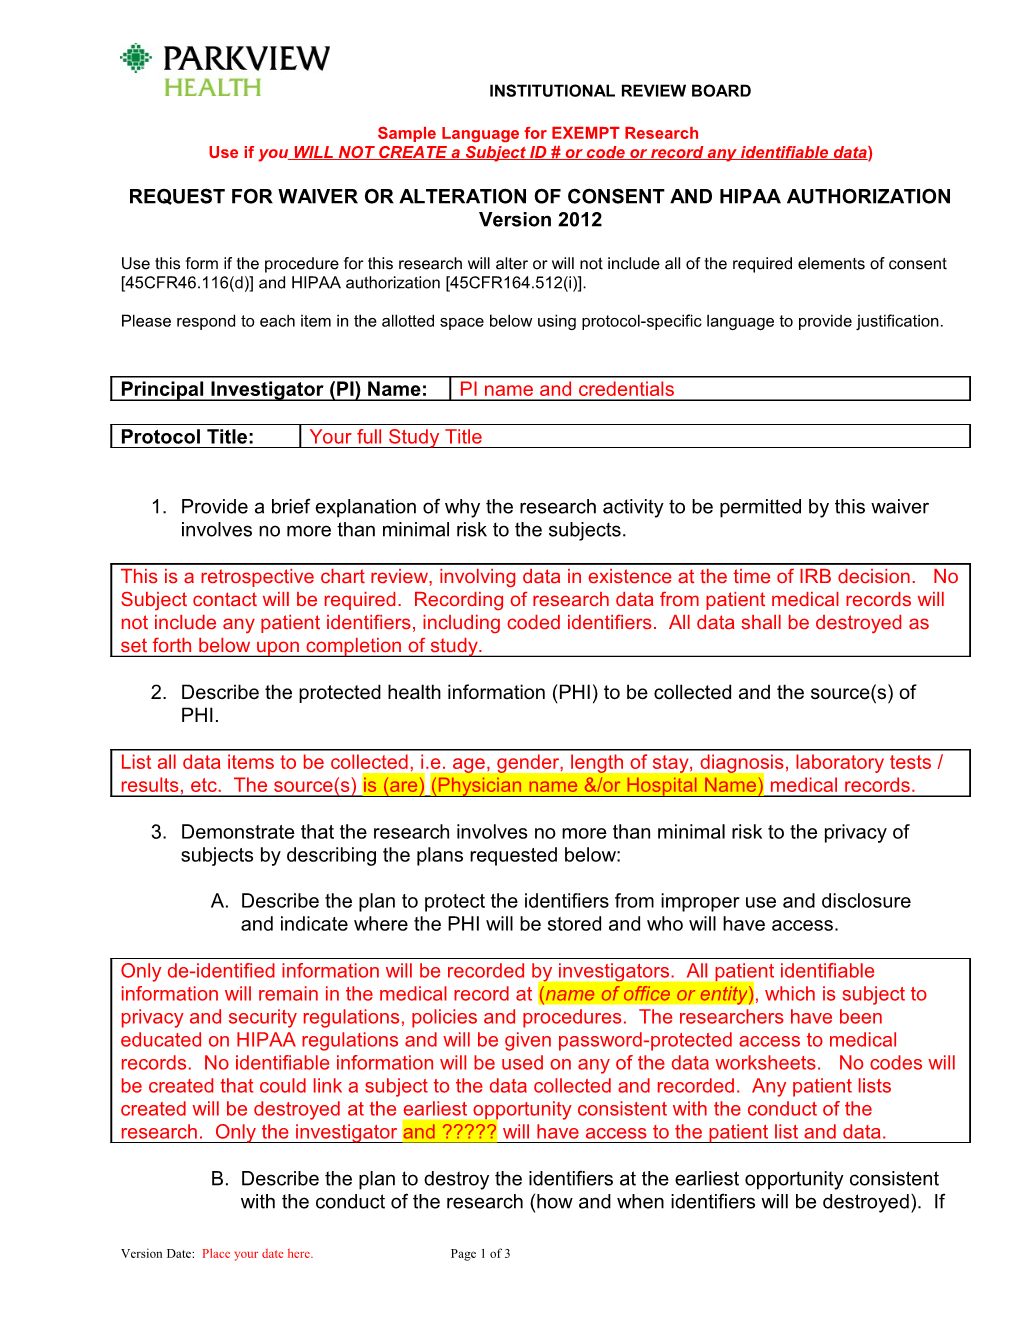 Request for Waiver Or Alteration of Consent and HIPAA Authorization